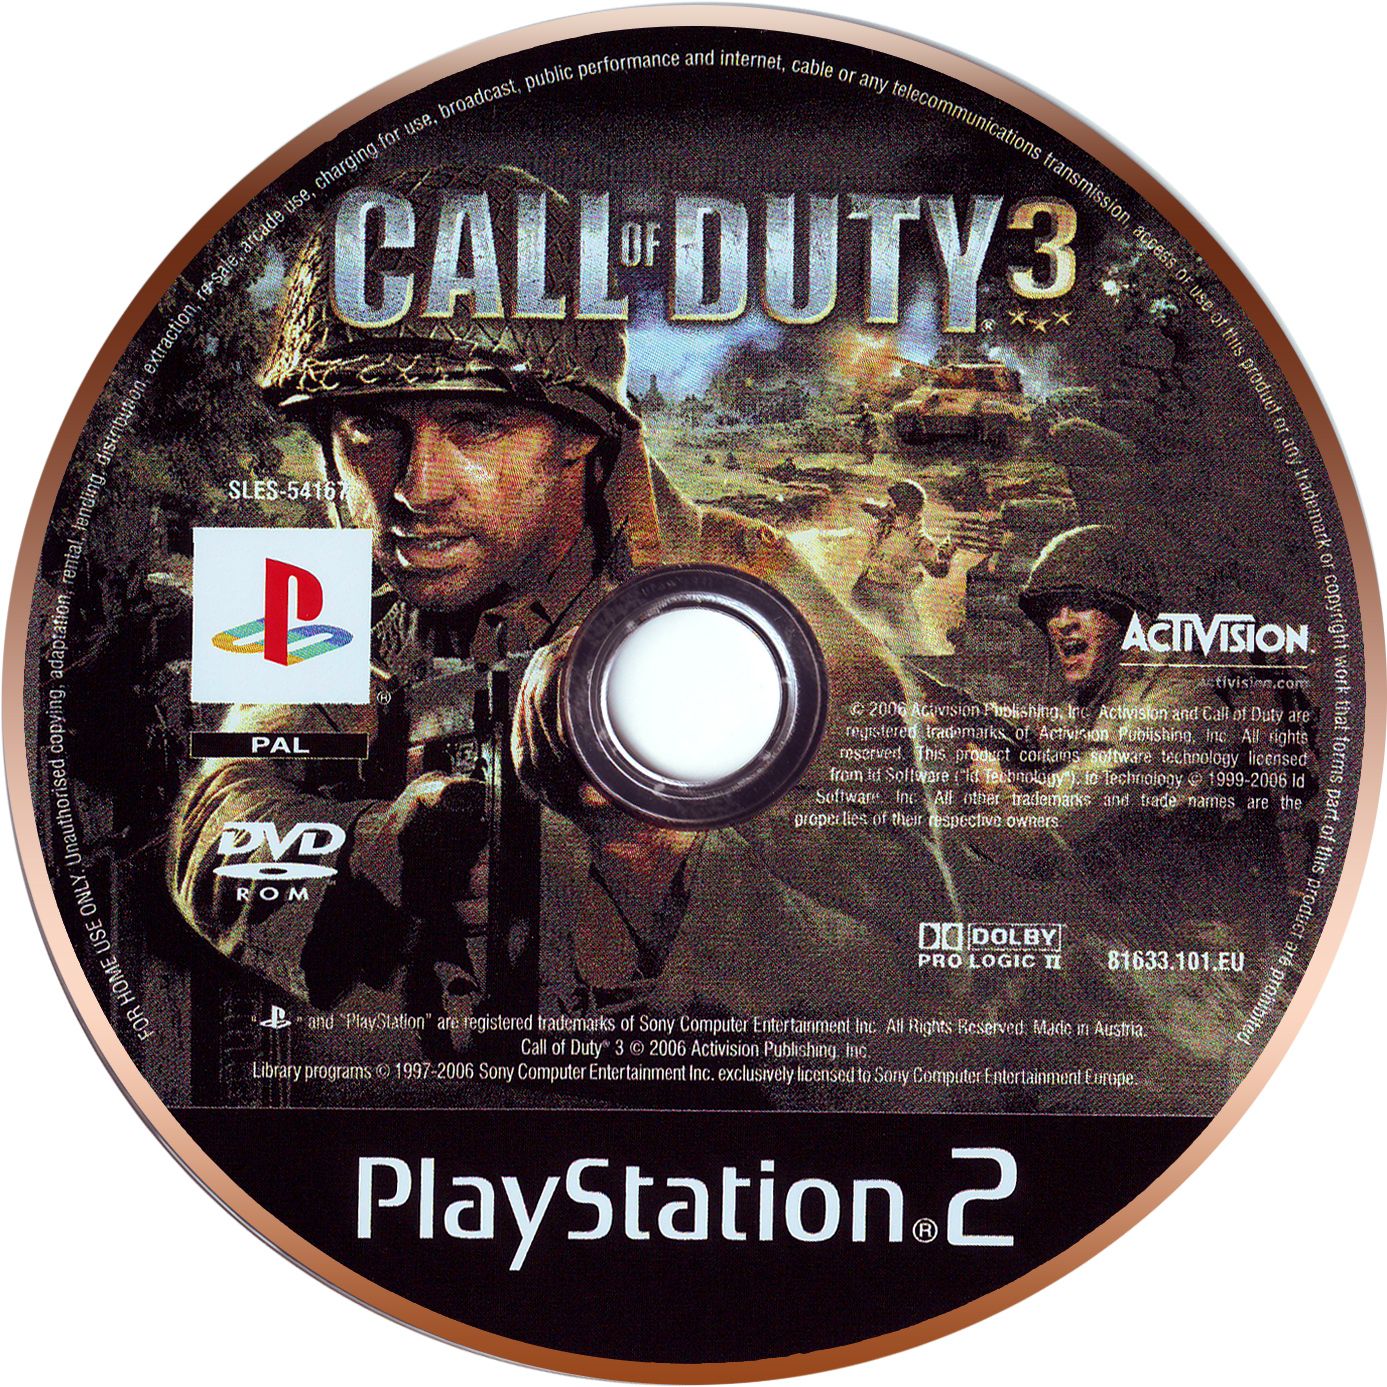 Диск игры call of duty. Cod 3 ps2. Диск Call of Duty PS 2. Диск пс2 Call of Duty 3. Call of Duty 3 ps3 диск.